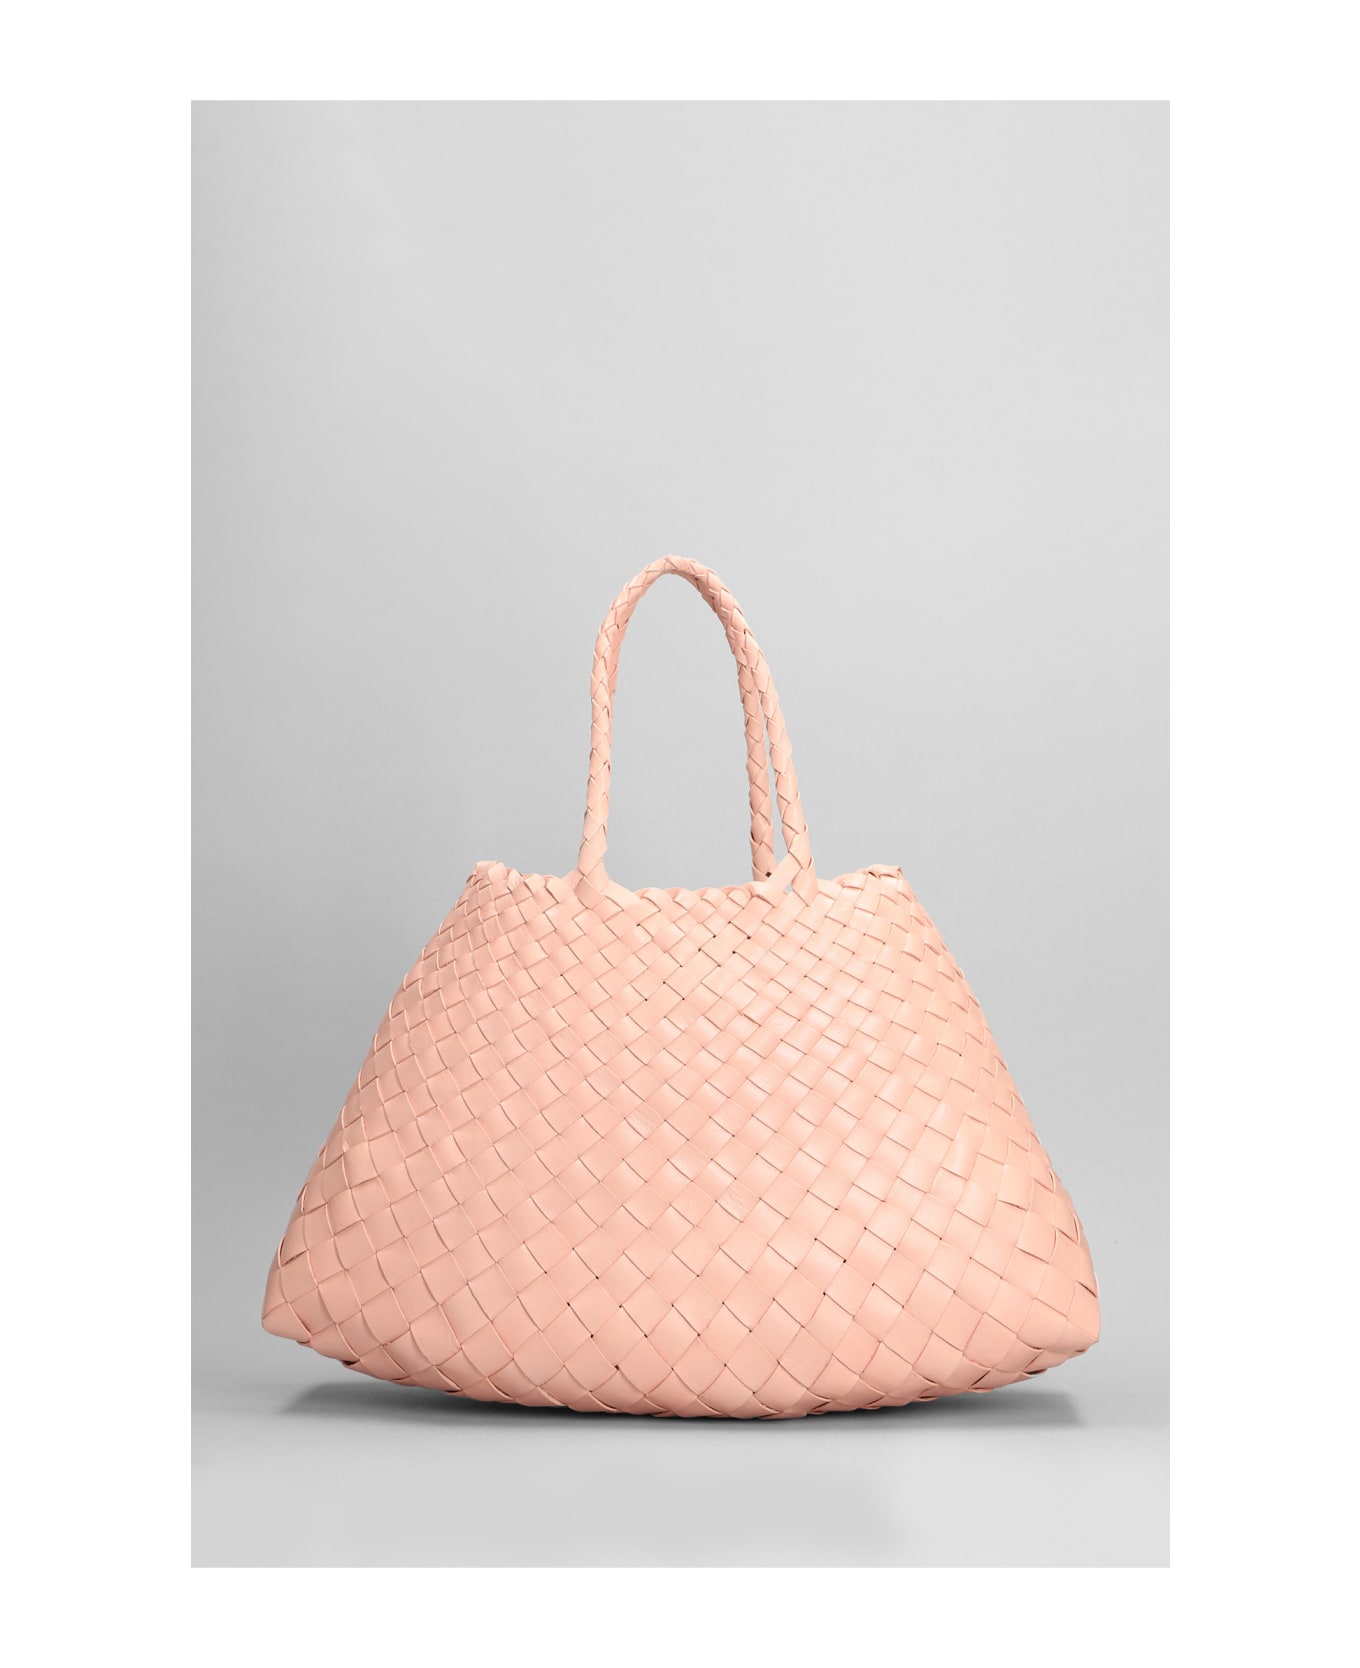 Dragon Diffusion Santa Croce Small Tote In Rose-pink Leather - rose-pink